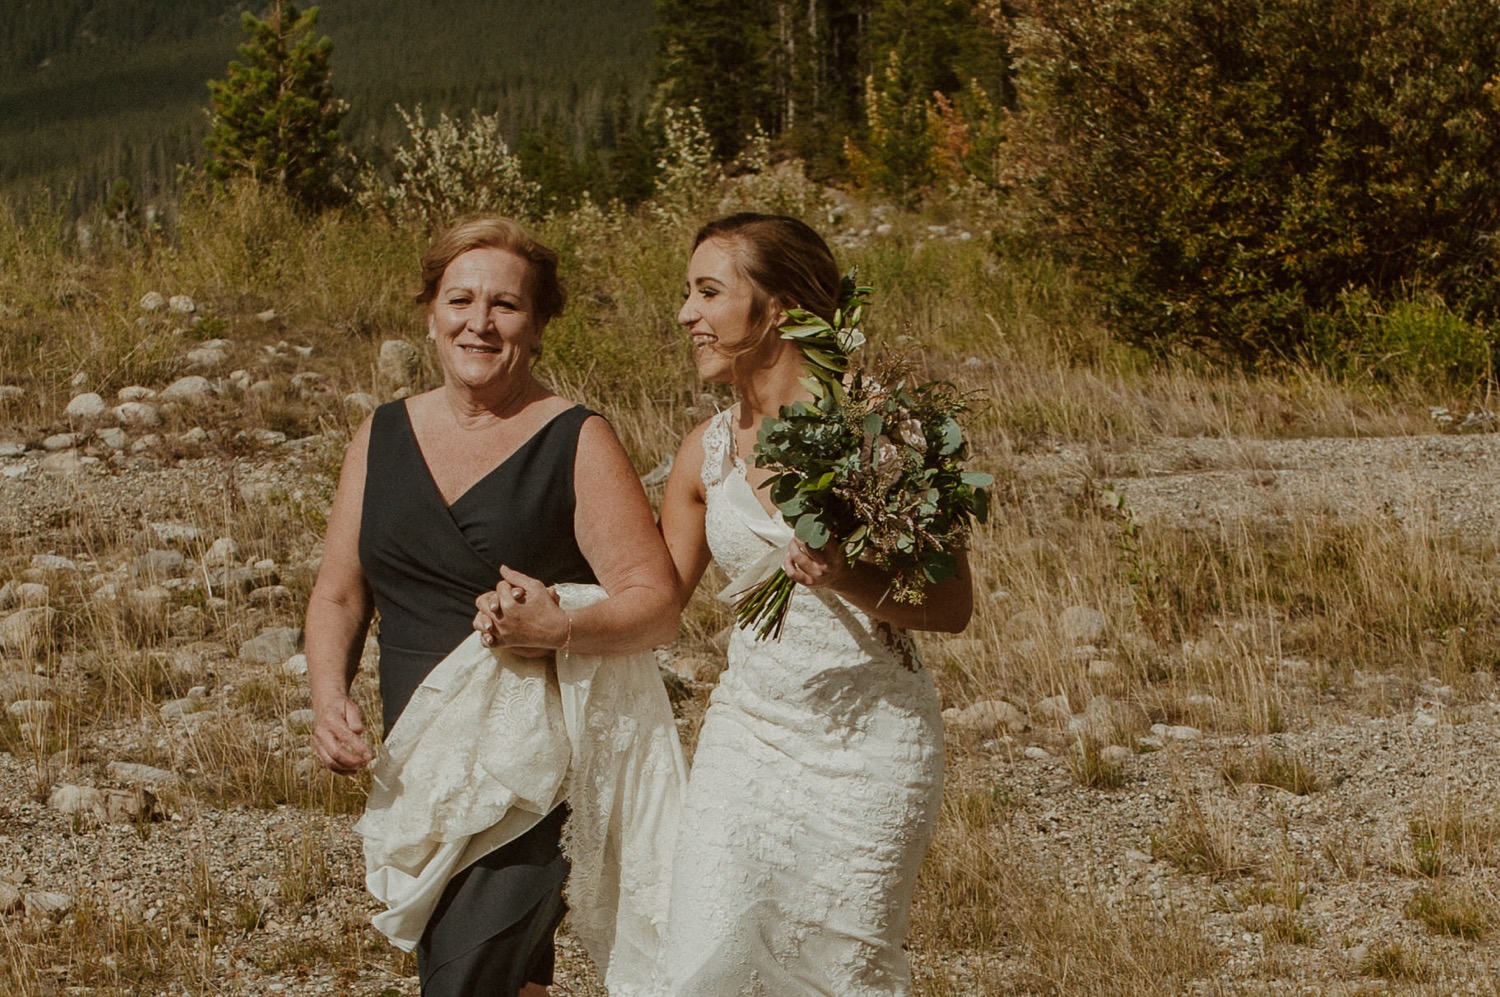 The mother walks the bride down the make shift aisle for their ceremony on the shore of Spray Lakes Alberta